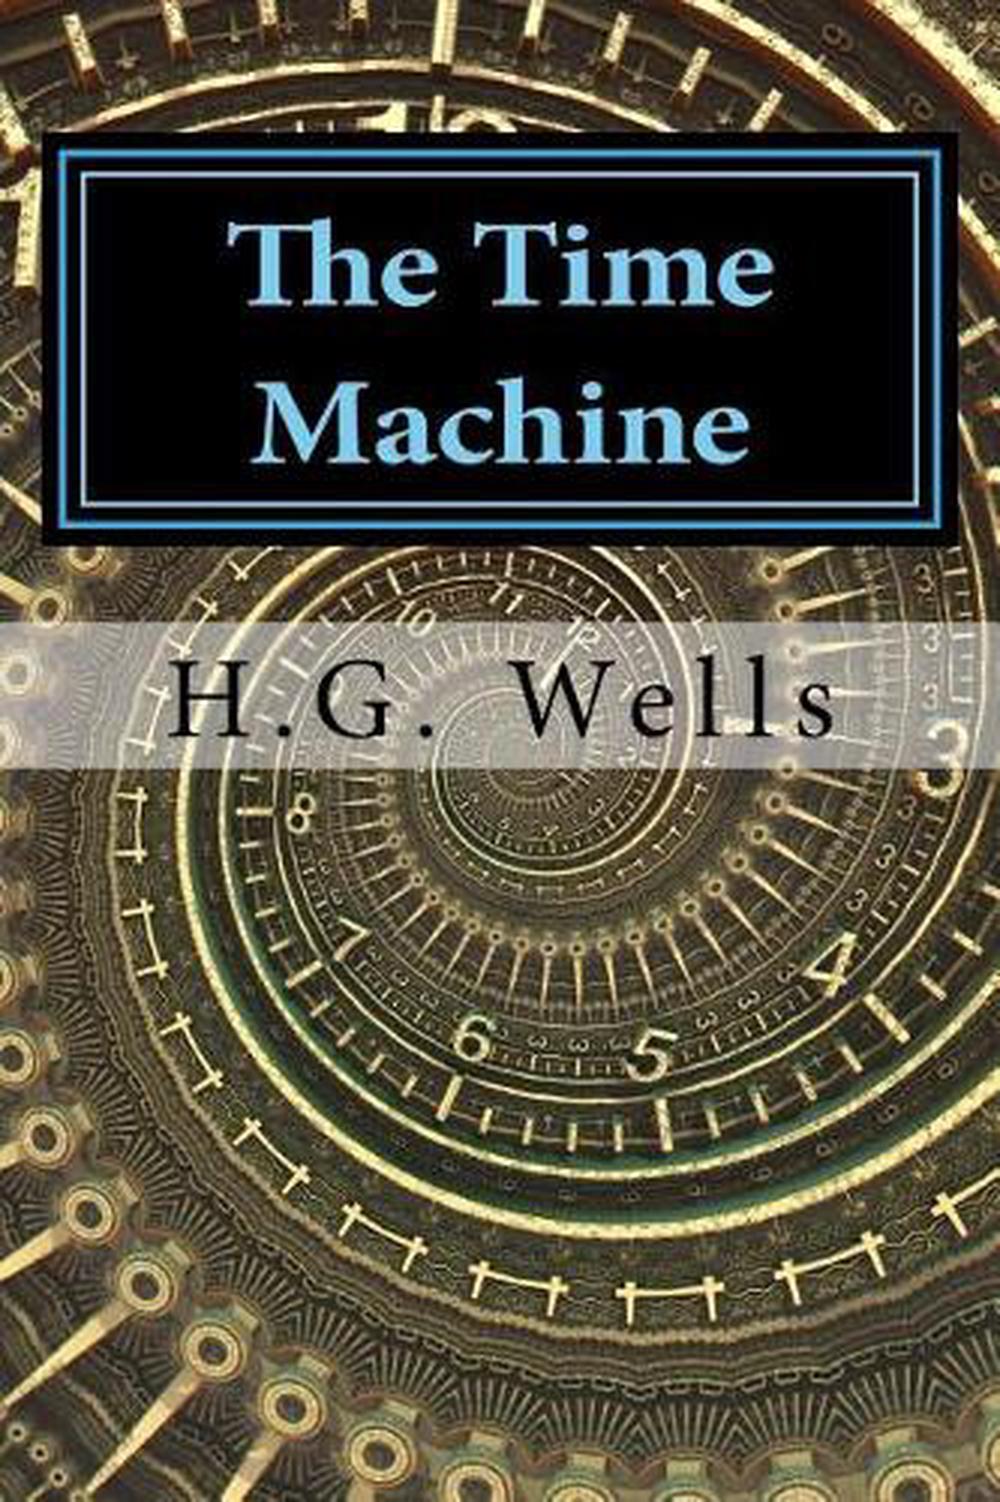 the time machine h.g wells book review